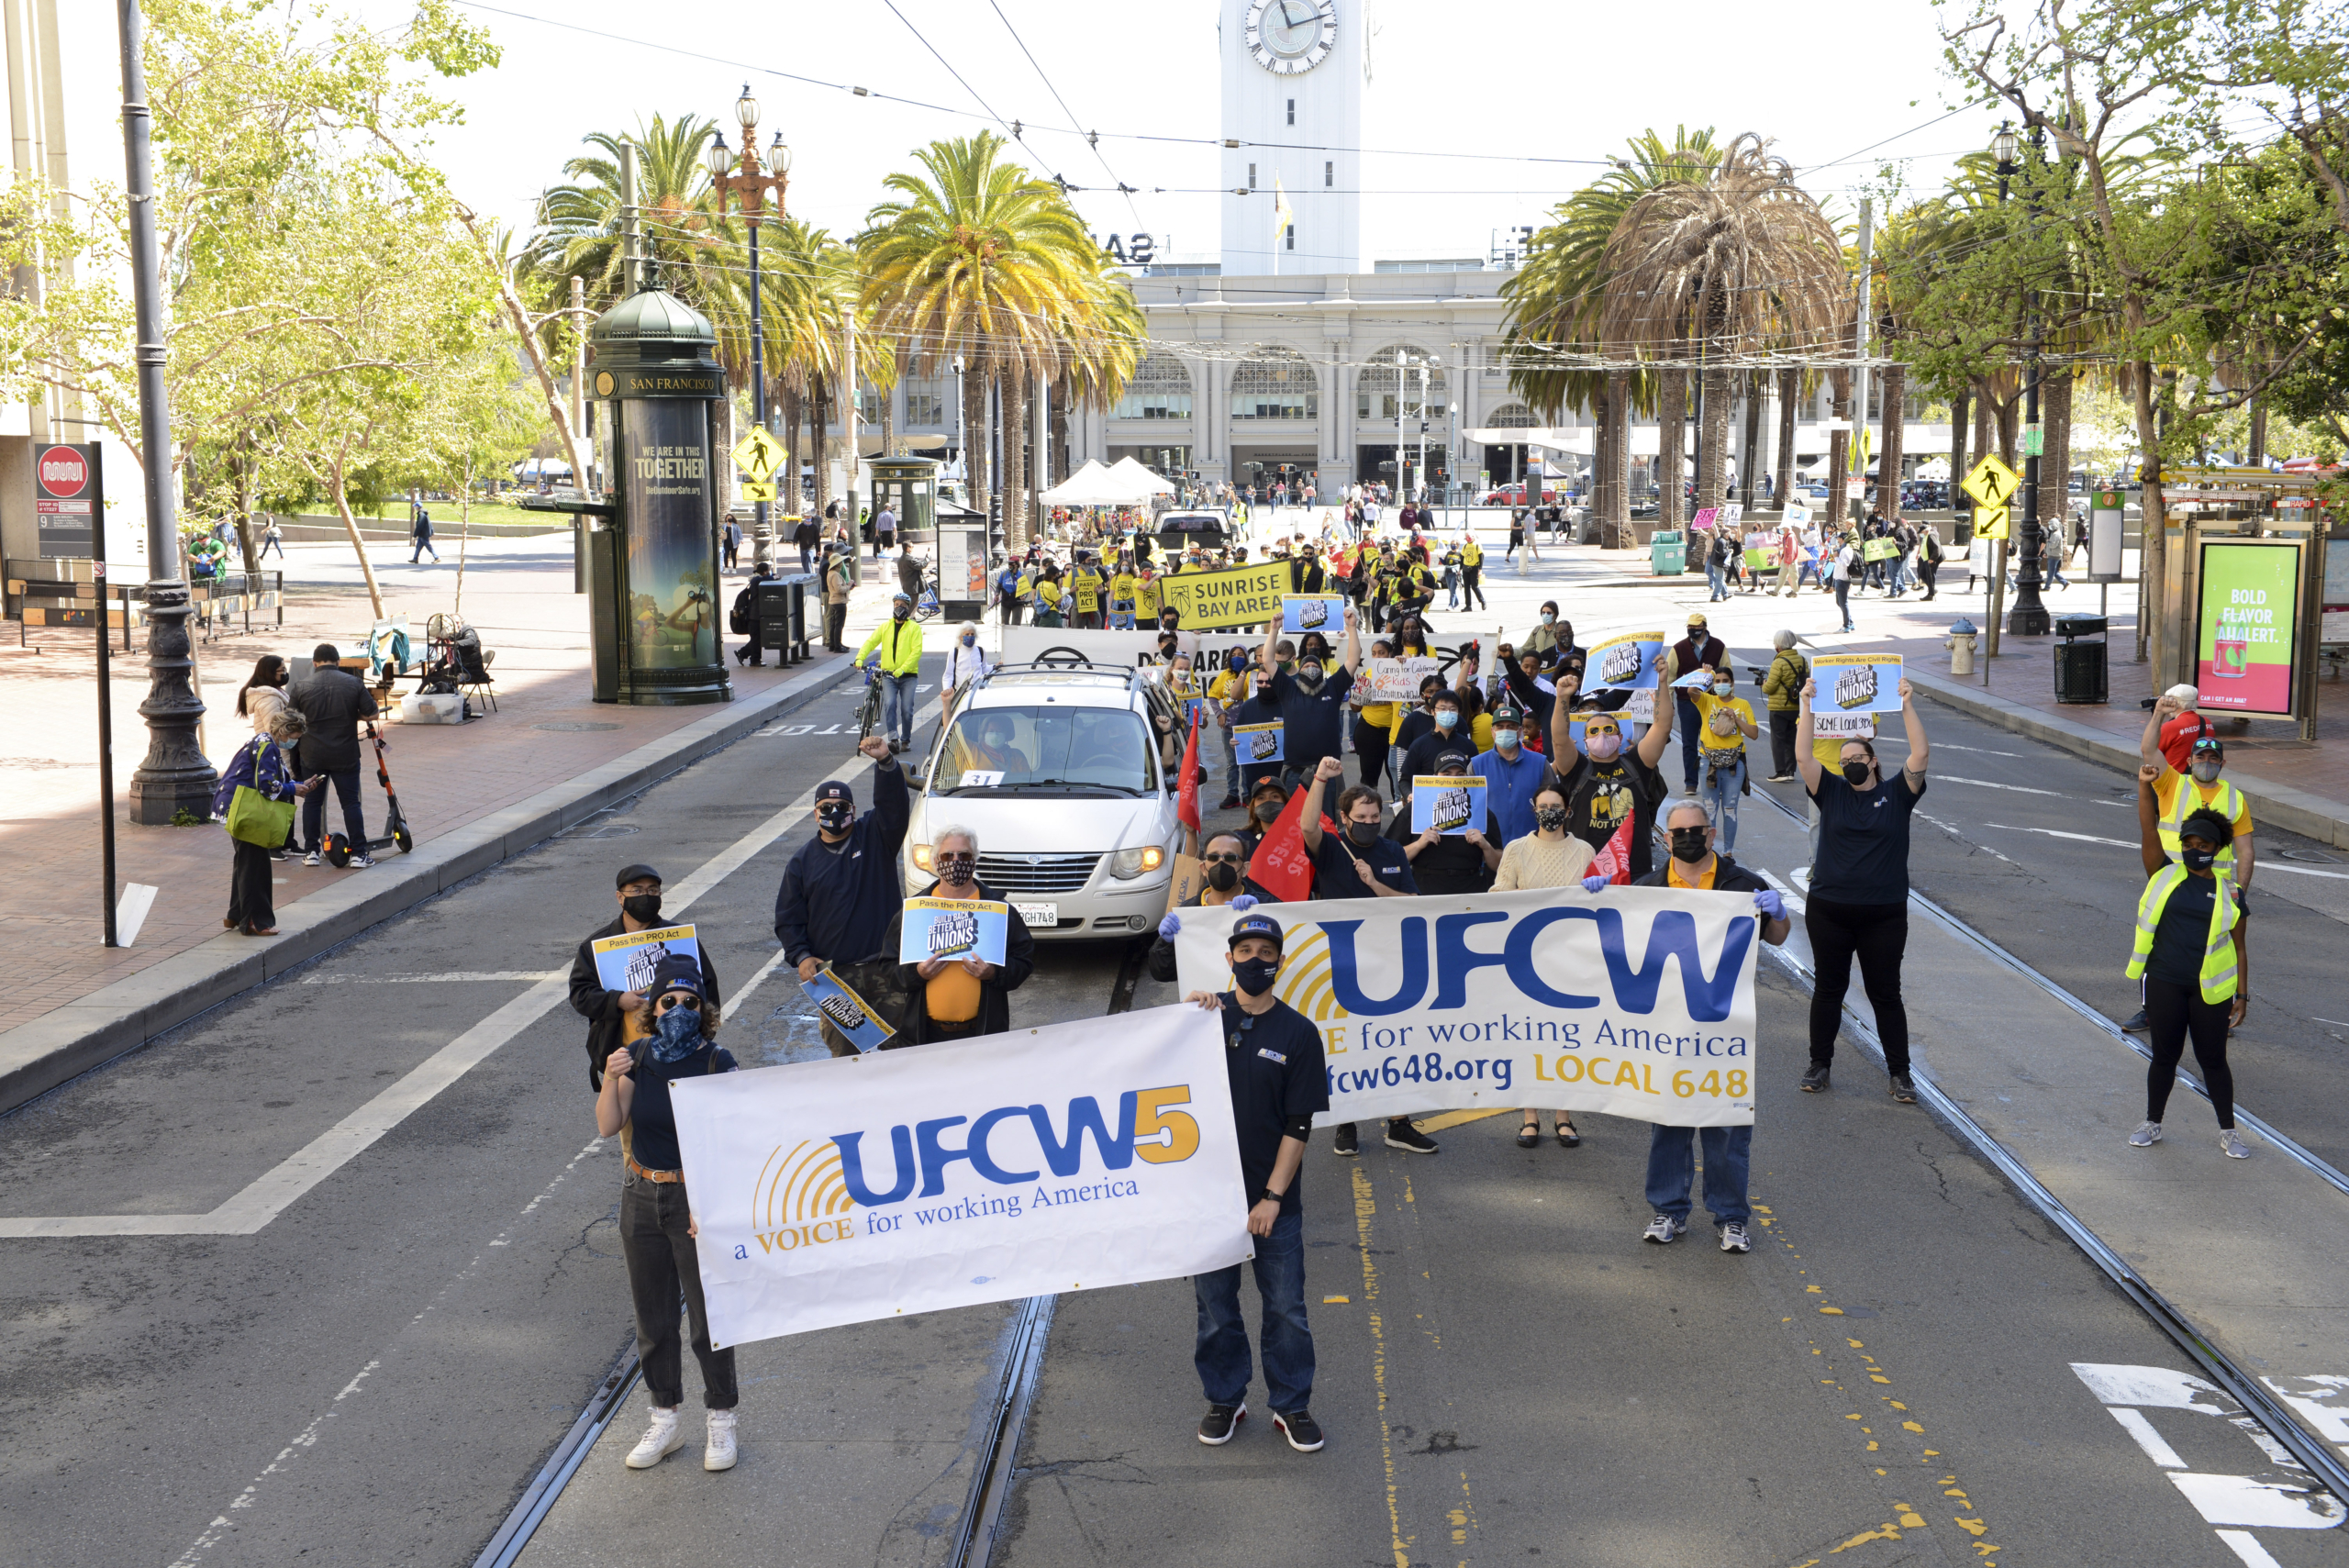 UFCW5 members conducting a rally